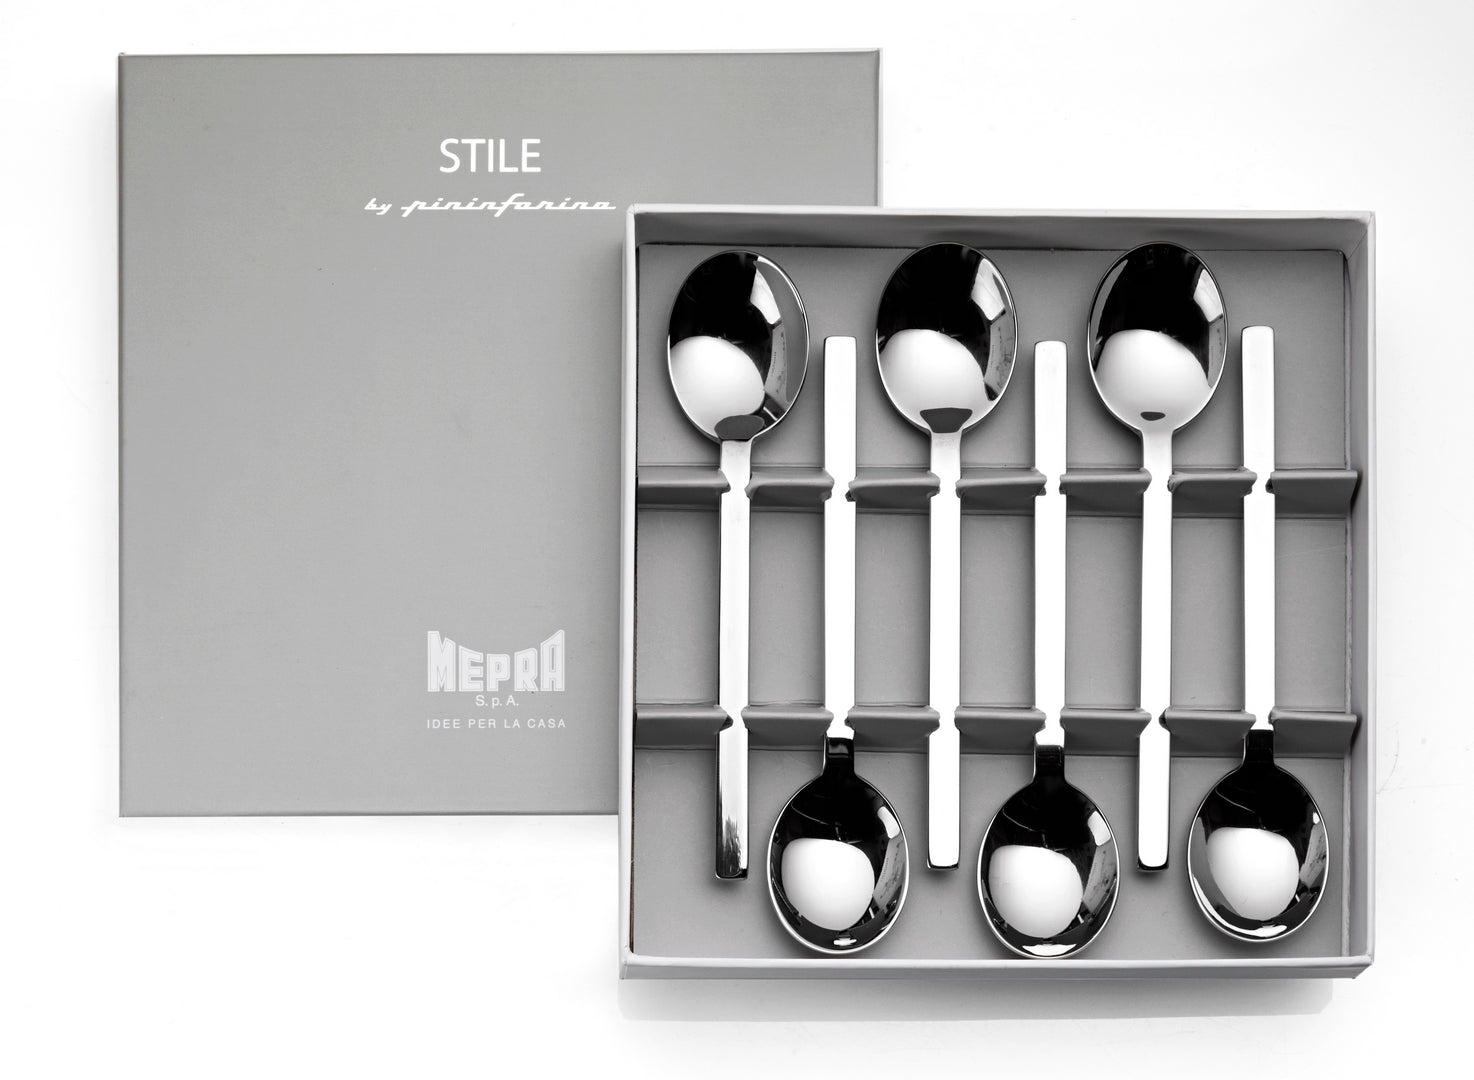 6 Piece Coffee Spoon Set with Gift Box - Stile